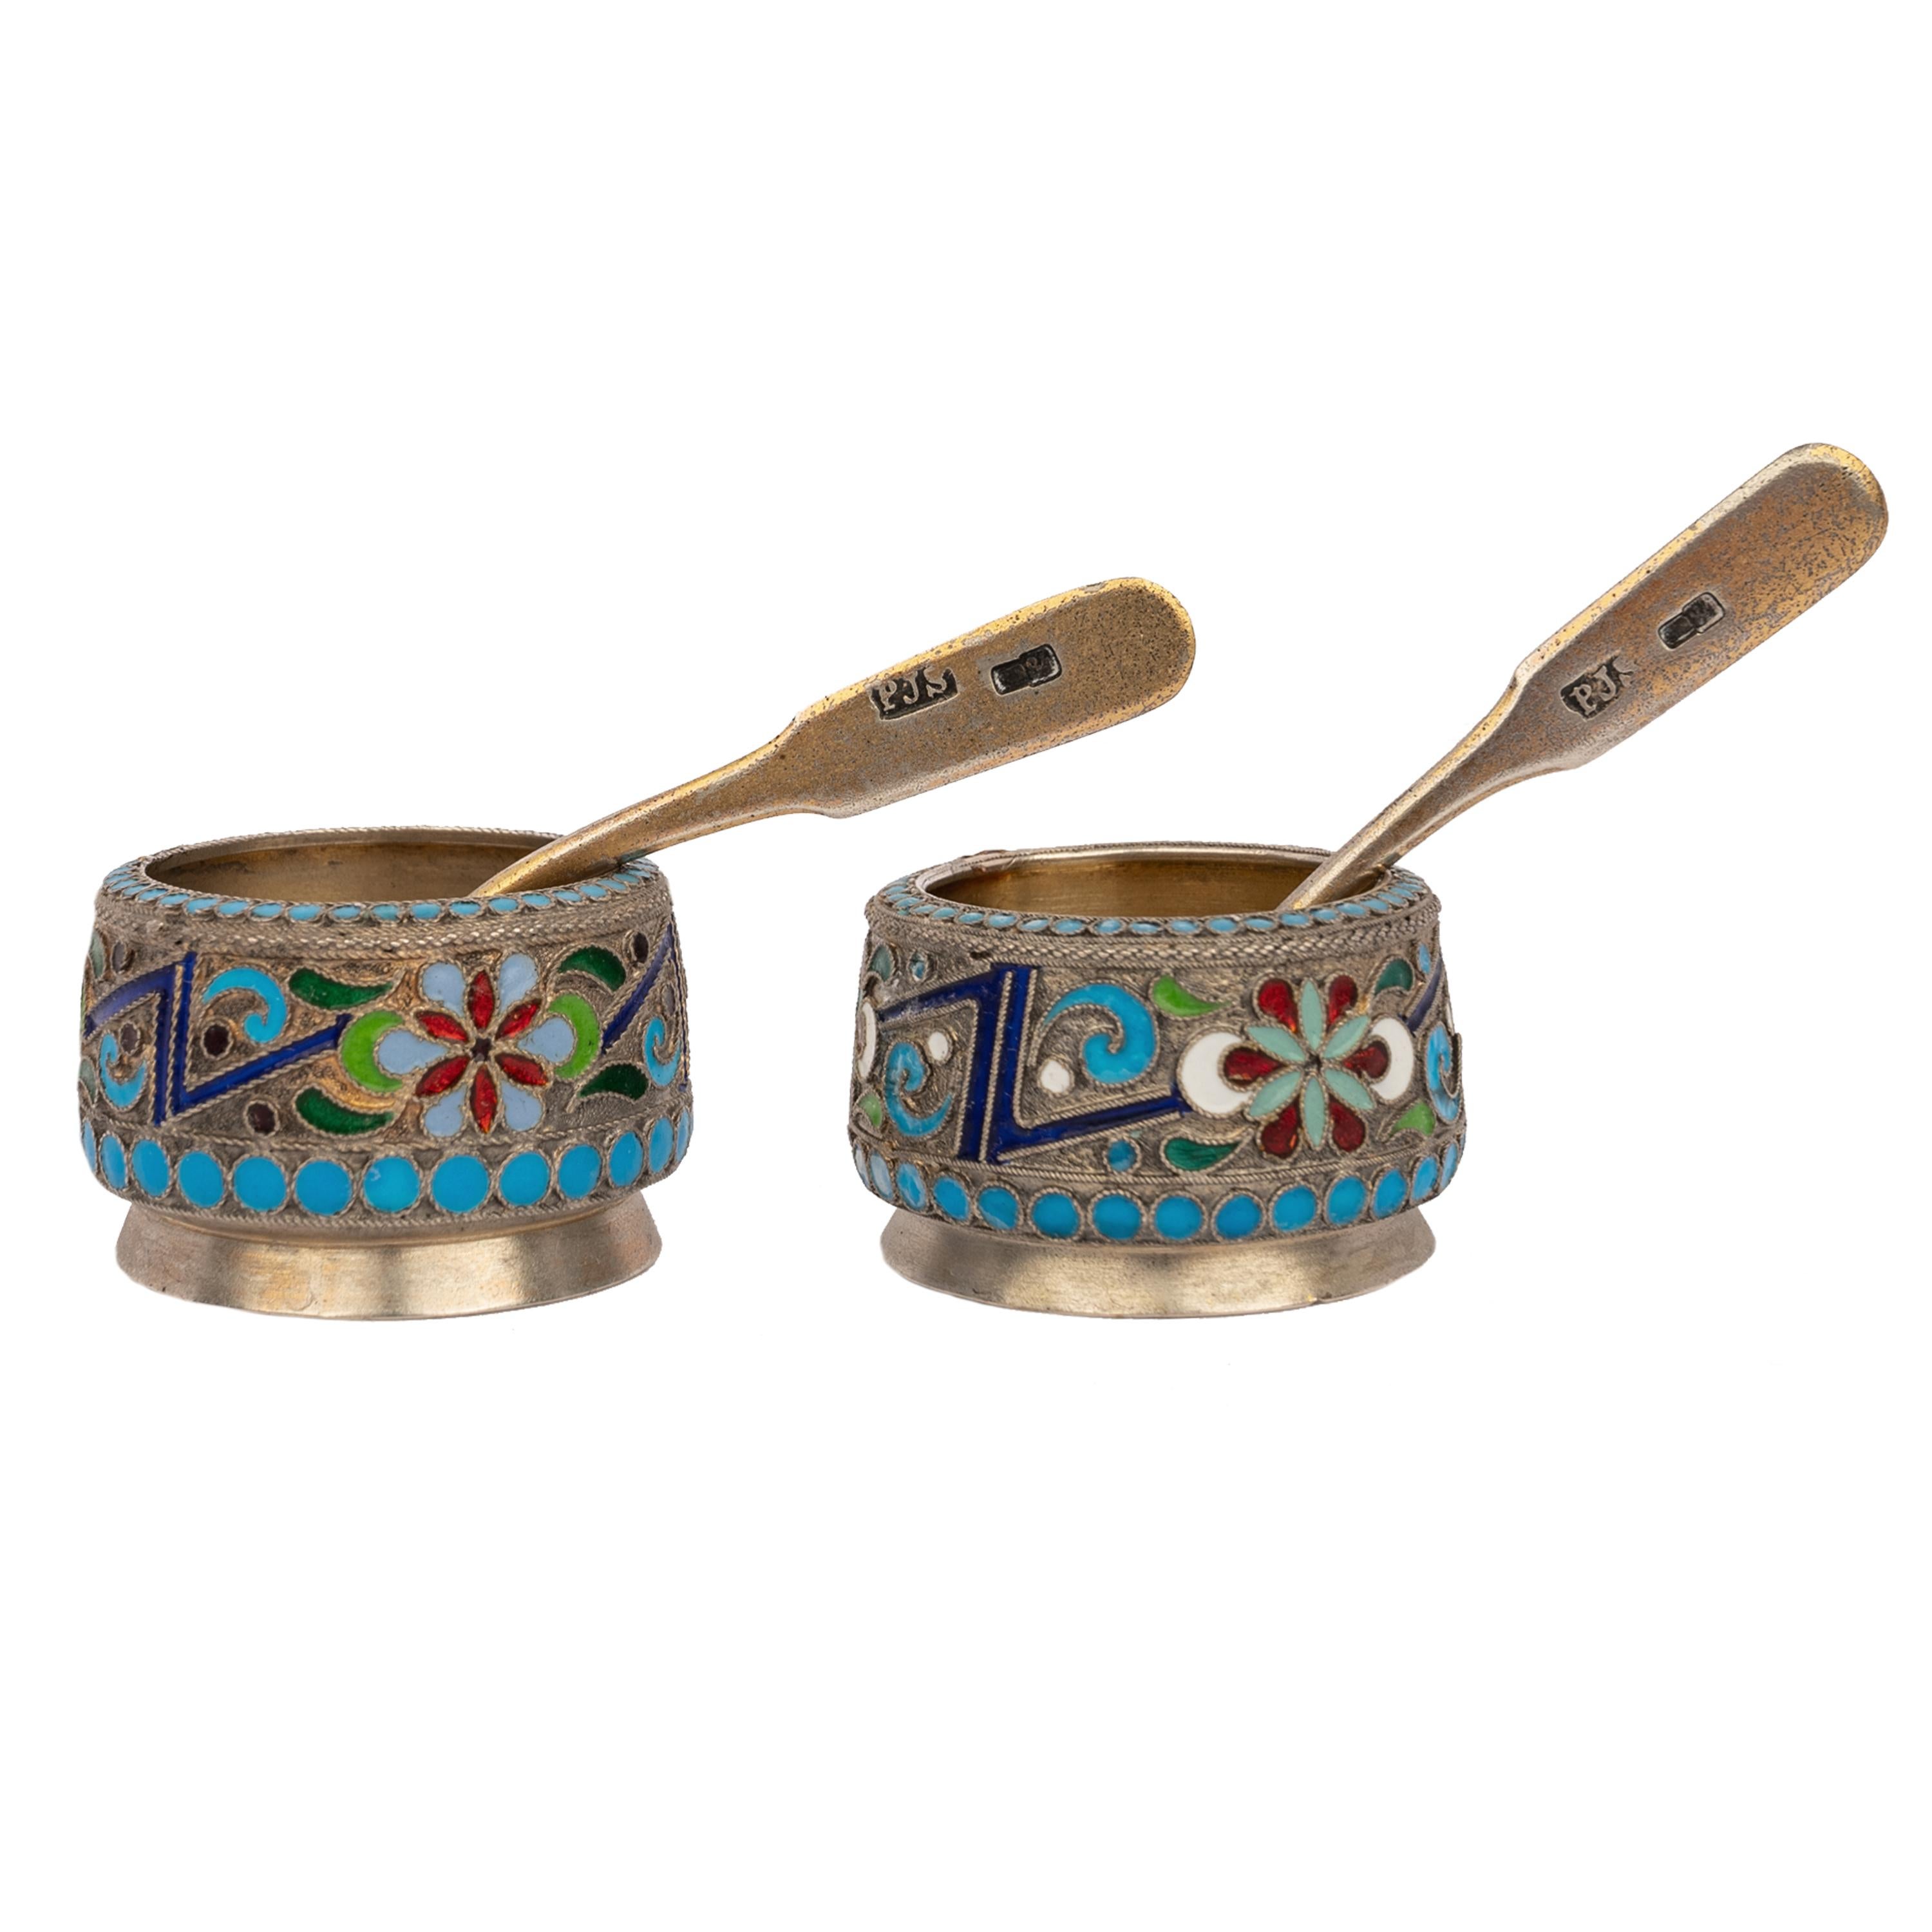 A good pair of antique Russian Imperial silver-gilt & cloisonné enamel salts and spoons, St. Petersburg, circa 1908.
The salts of circular form and are finely decorated with multi-color geometric floral cloisonné enamel, each salt having a shovel